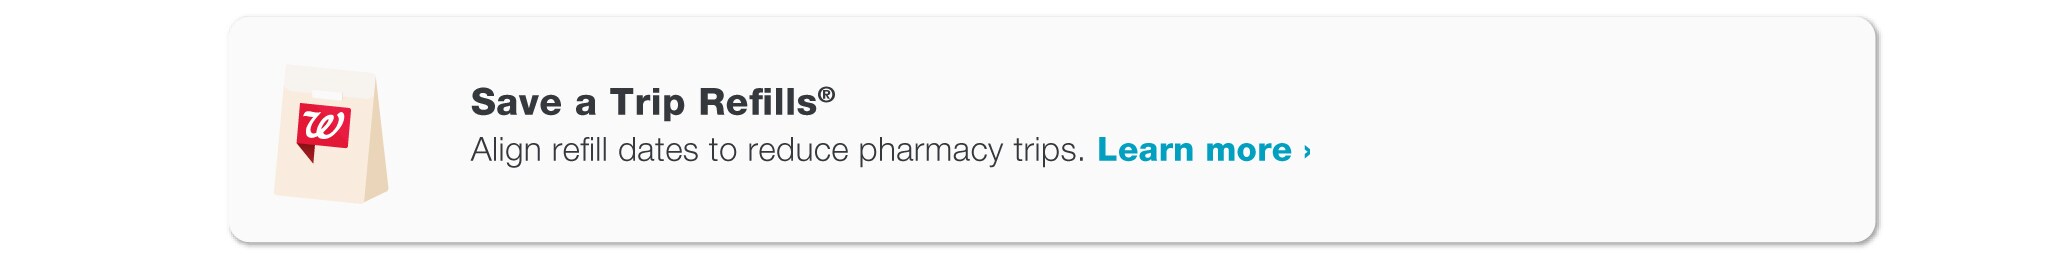 Save a Trip Refills(R). Align refill dates to reduce pharmacy trips. Visit Walgreens.com/satr to learn more.